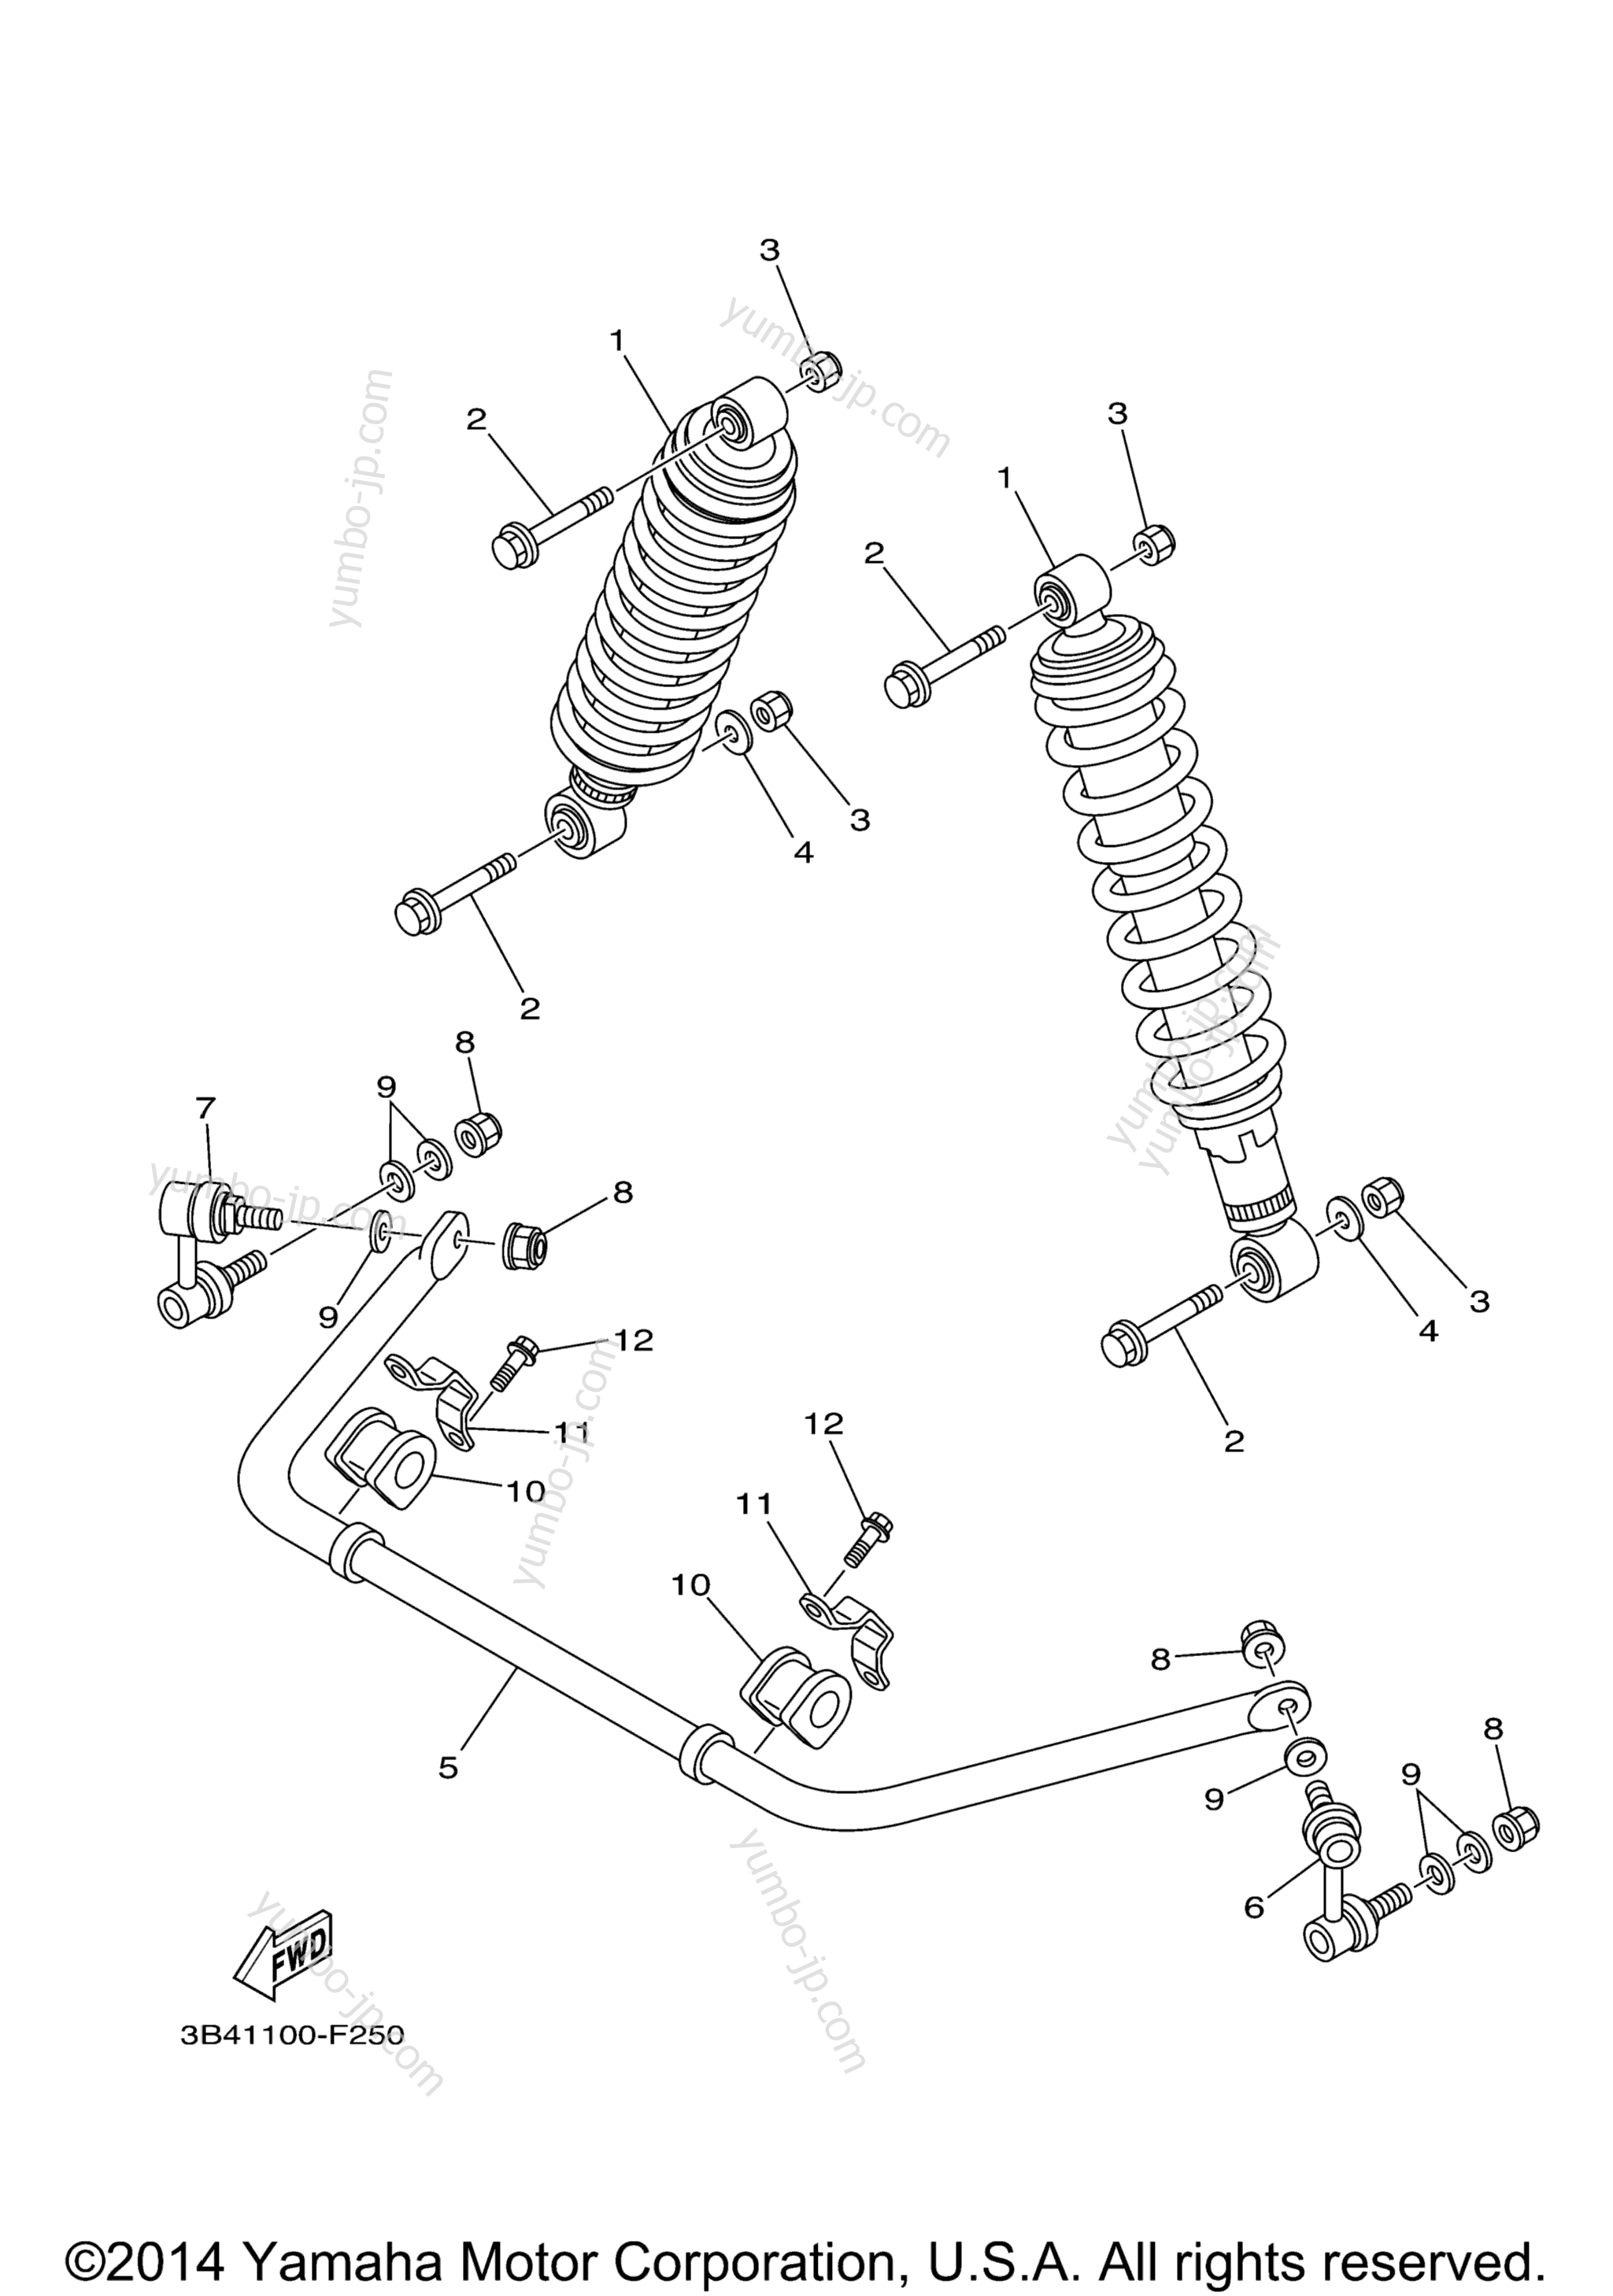 Rear Suspension for ATVs YAMAHA GRIZZLY 550 FI 4WD (YFM5FGZL) 2010 year